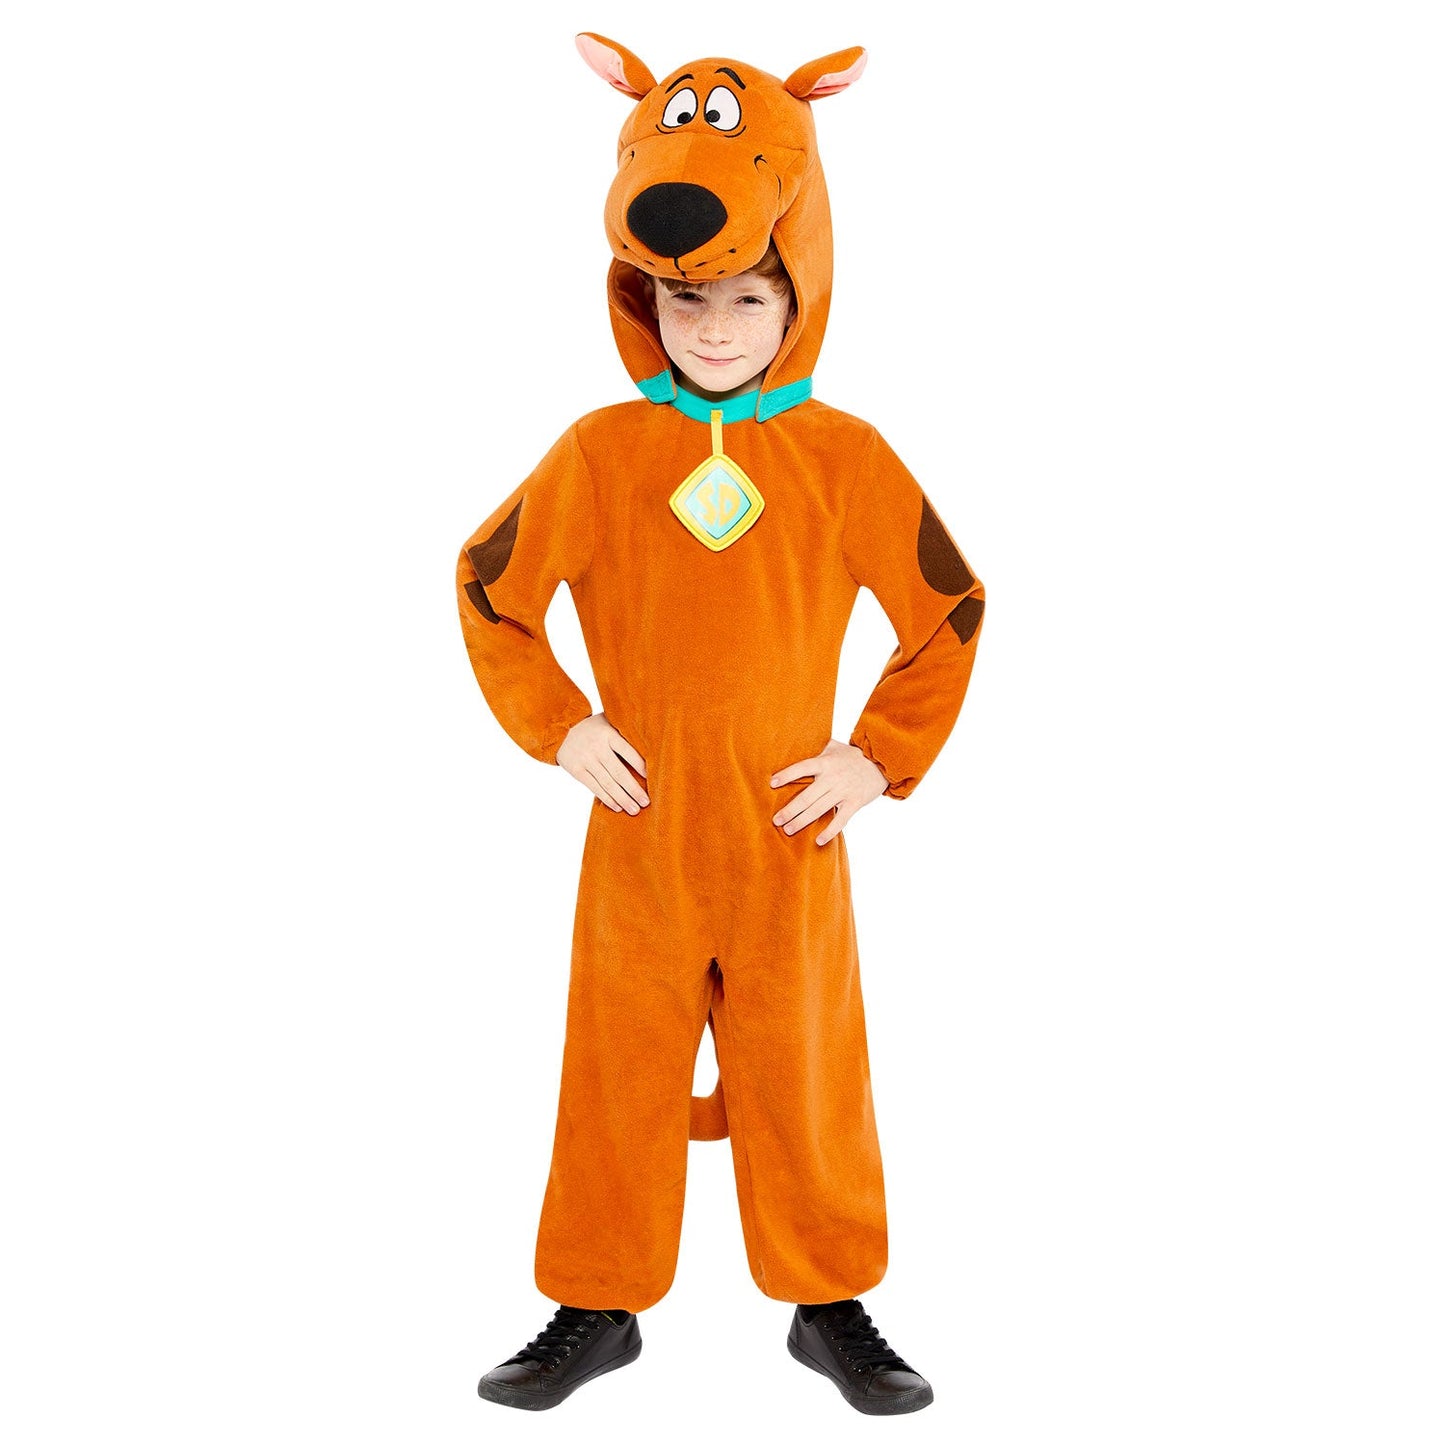 Scooby Doo Costume includes fleece jumpsuit, detachable shaped hood, logo dog tag and detachable tail